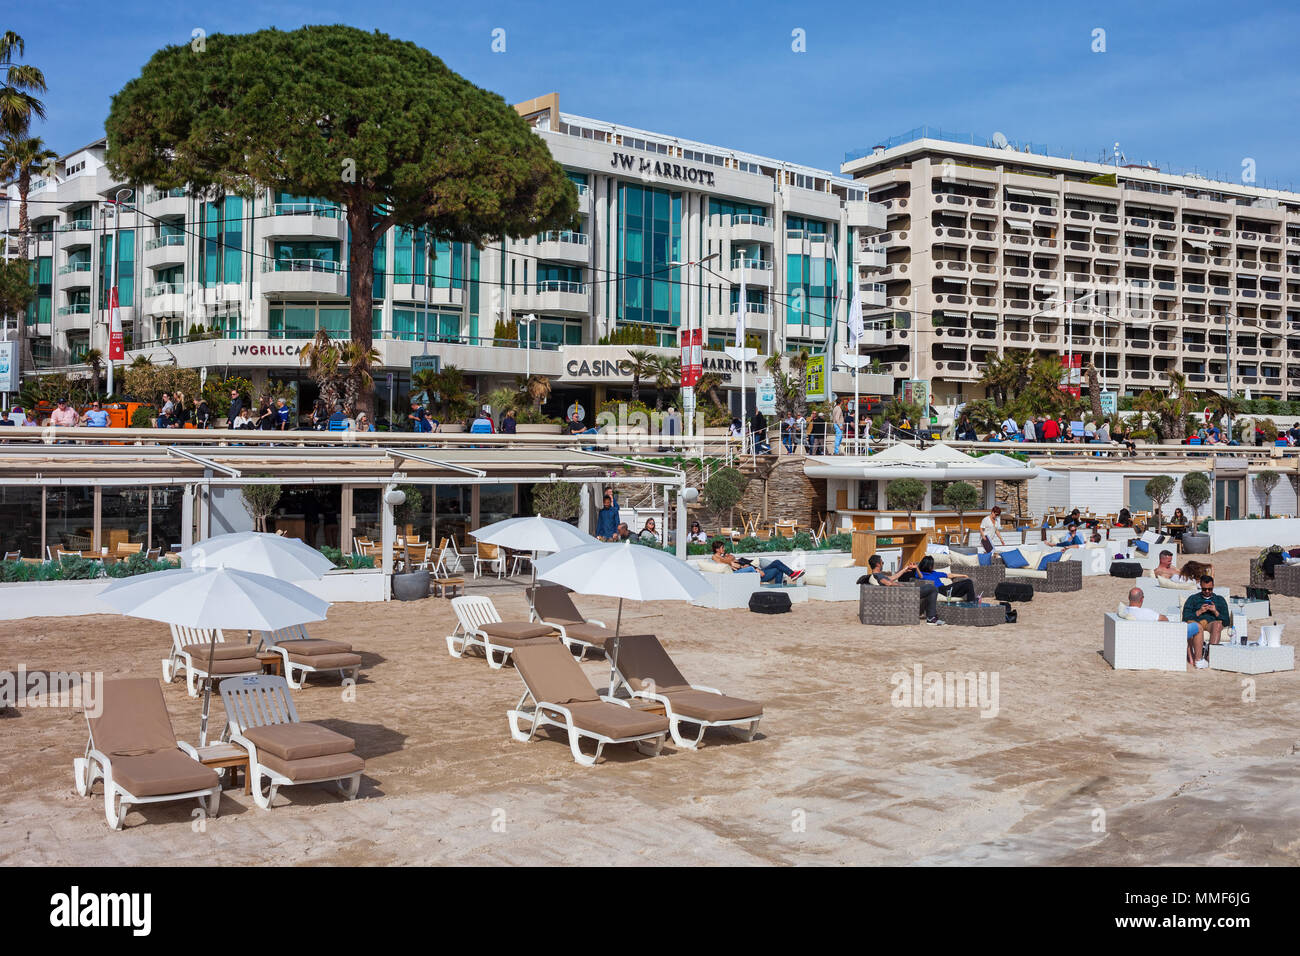 JW Marriott Hotel on Boulevard de la Croisette in Cannes city, France, view from the beach on French Riviera Stock Photo